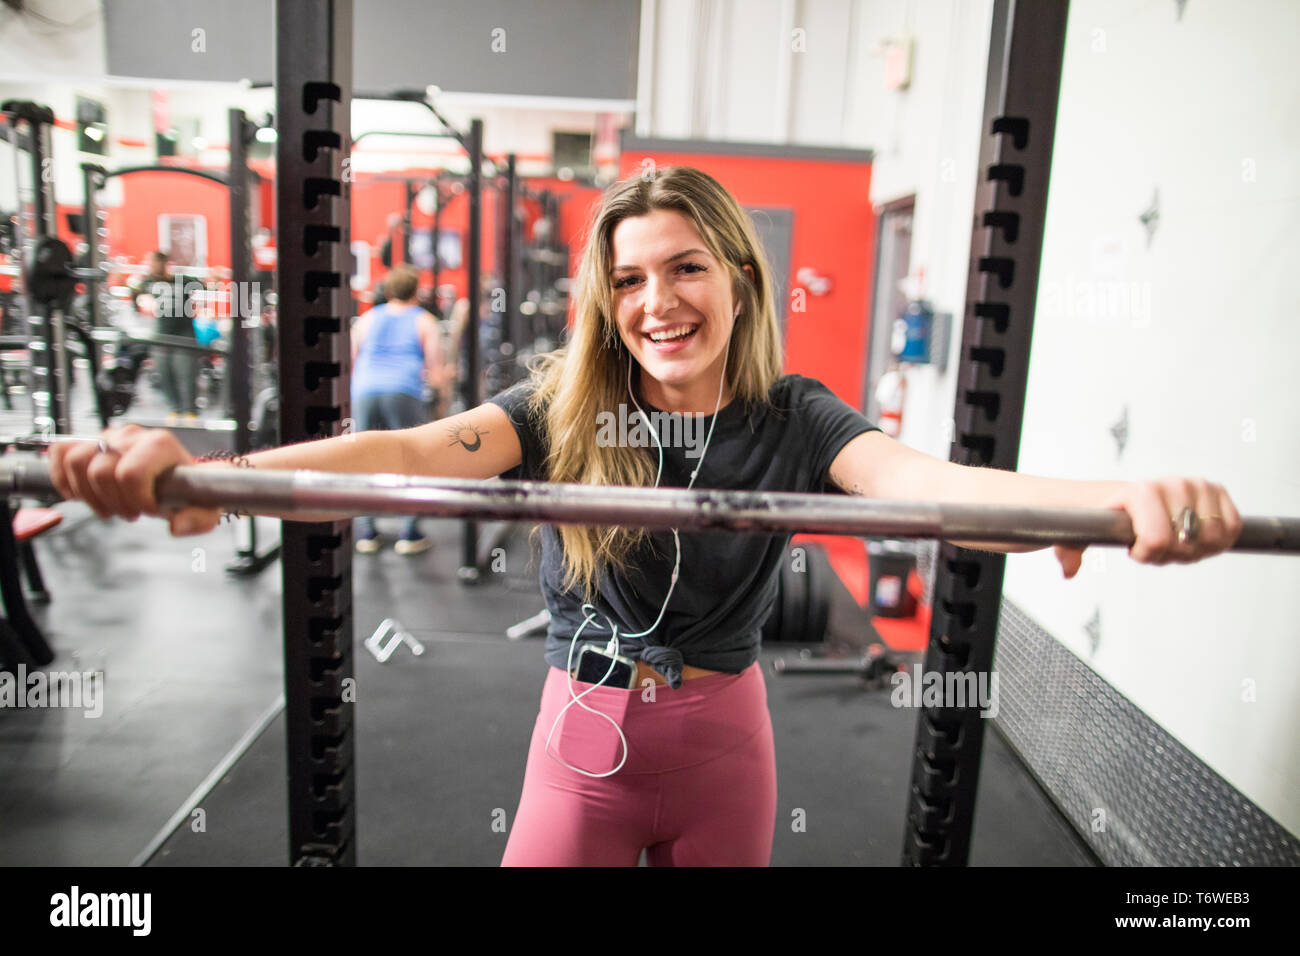 Smiling woman leaning on barbell at the gym Stock Photo